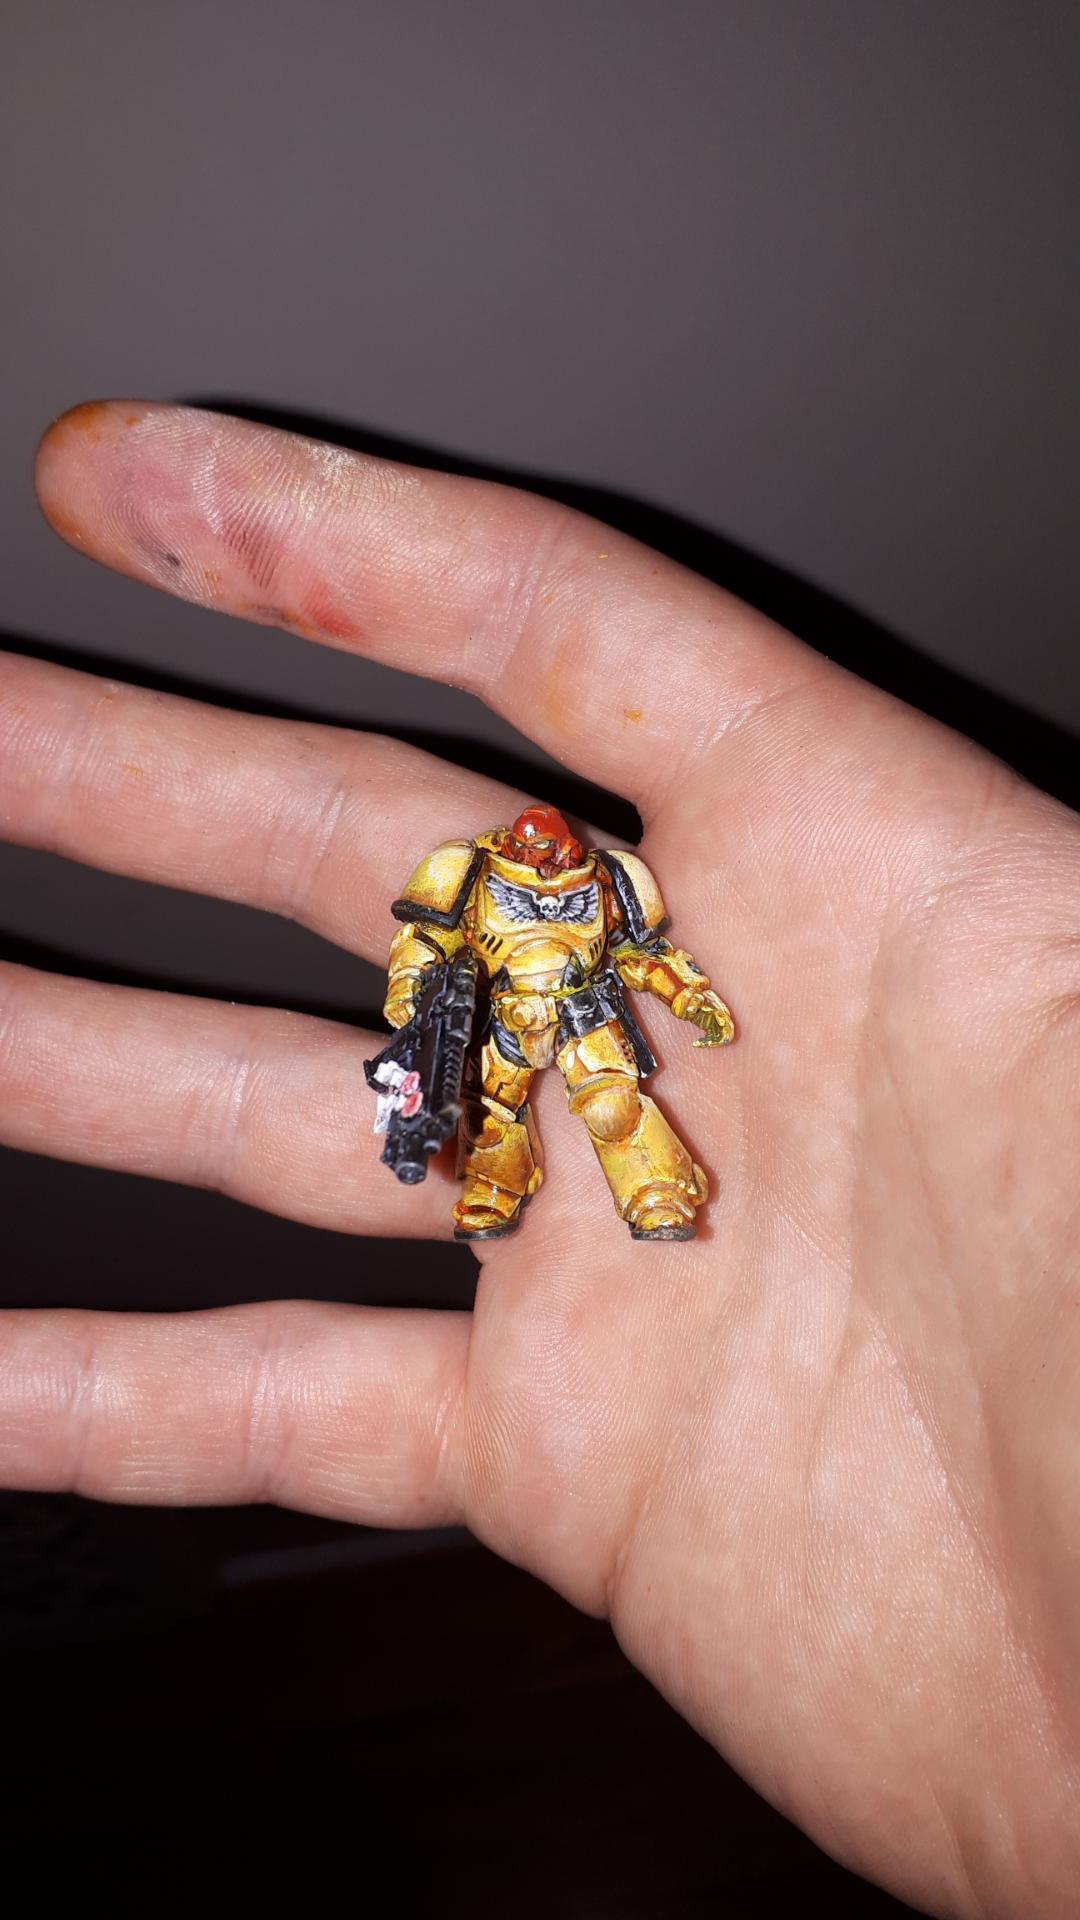 Imperial Fists, Imperial Fists Sergeant